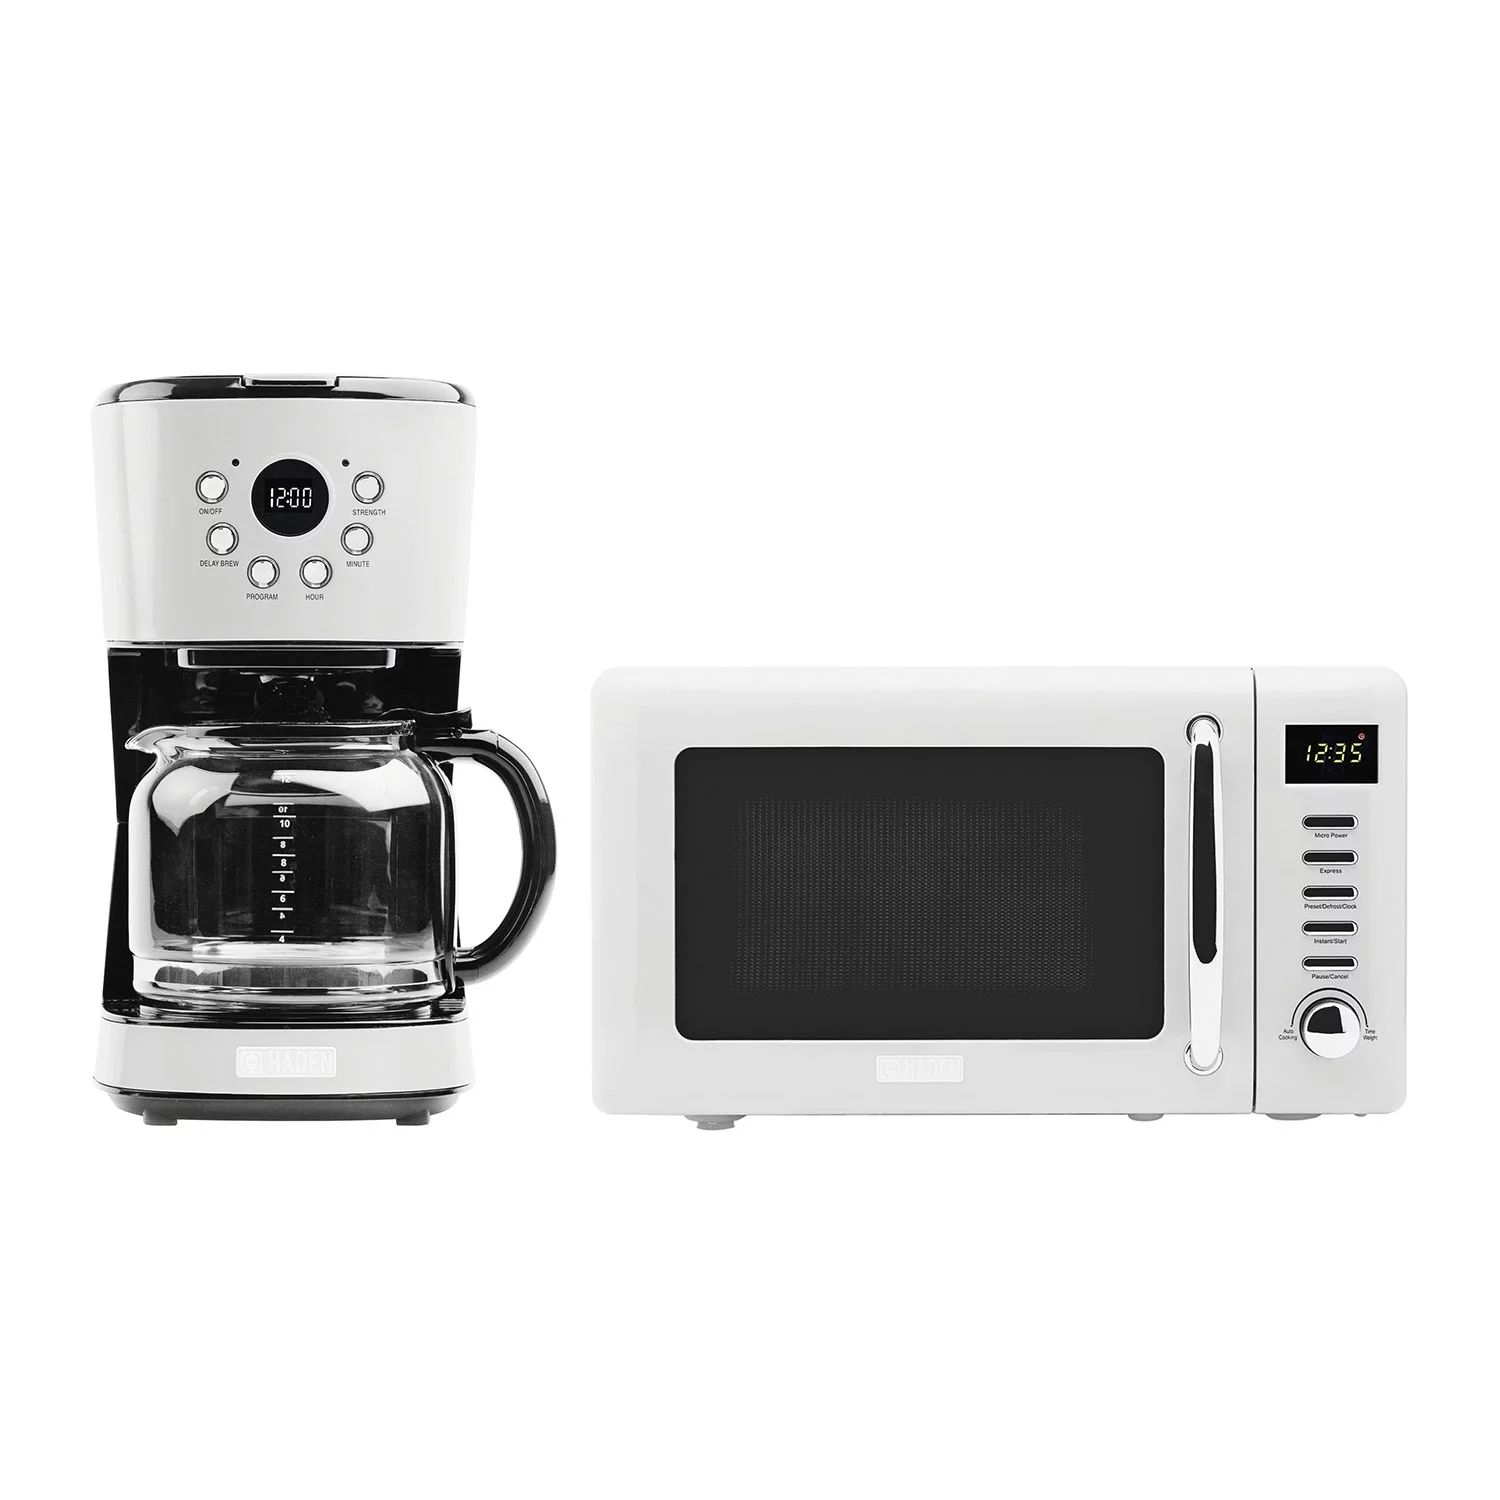 Haden Heritage 12 Cup Programmable Coffee Maker with Countertop Microwave, Blue | Walmart (US)